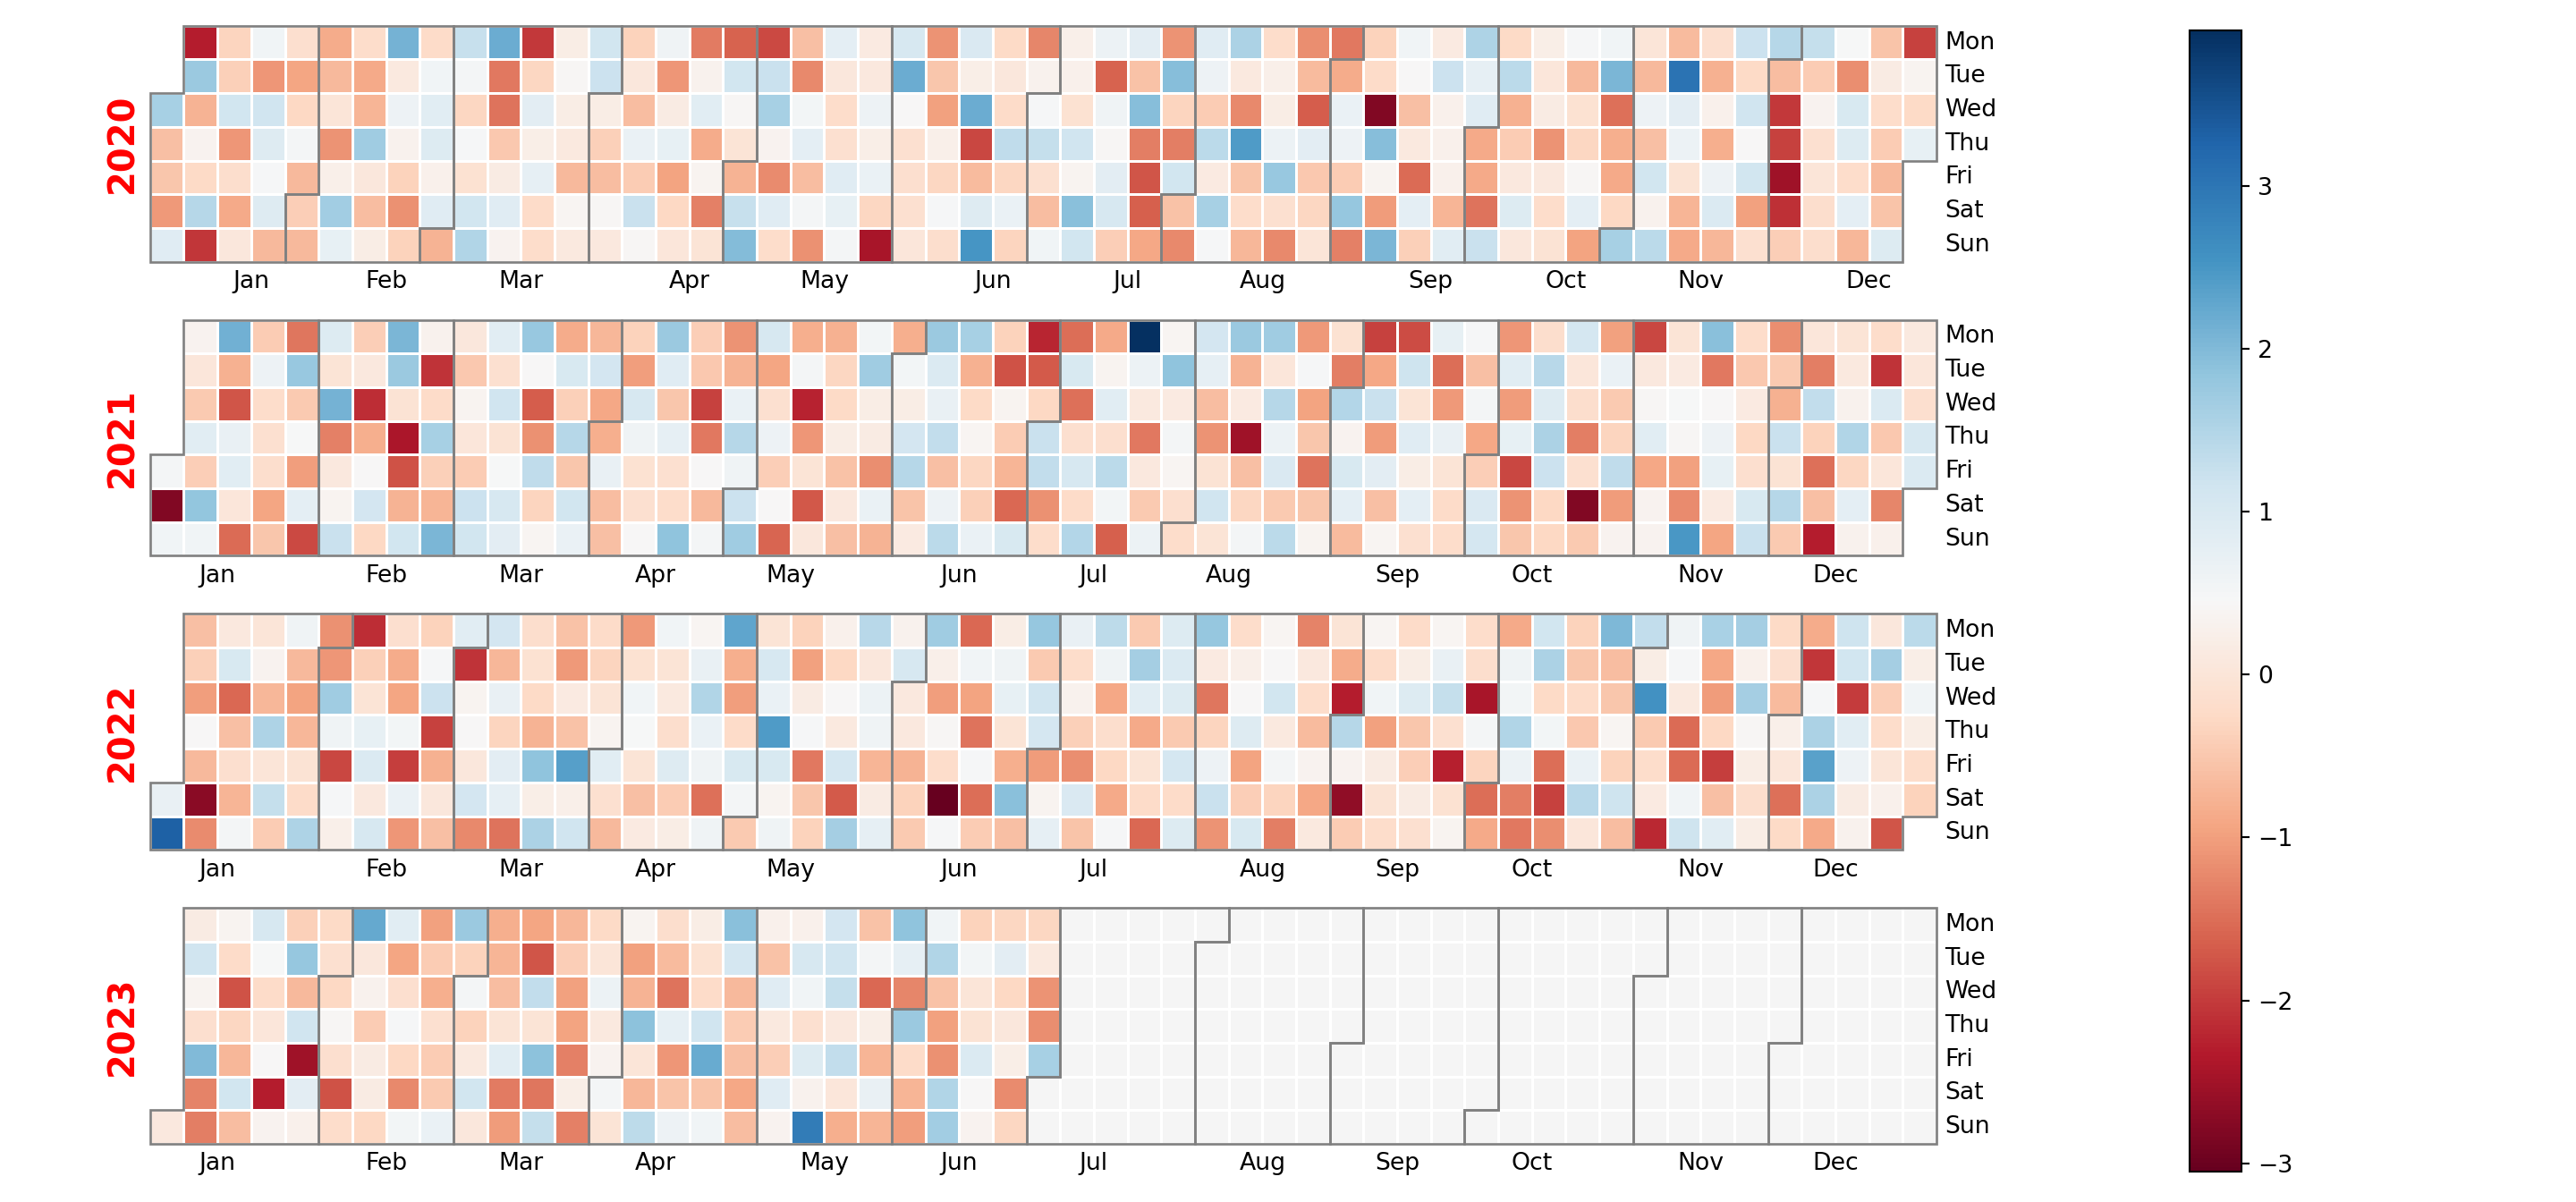 Customizing the year labels of the heatmap calendar made with Python